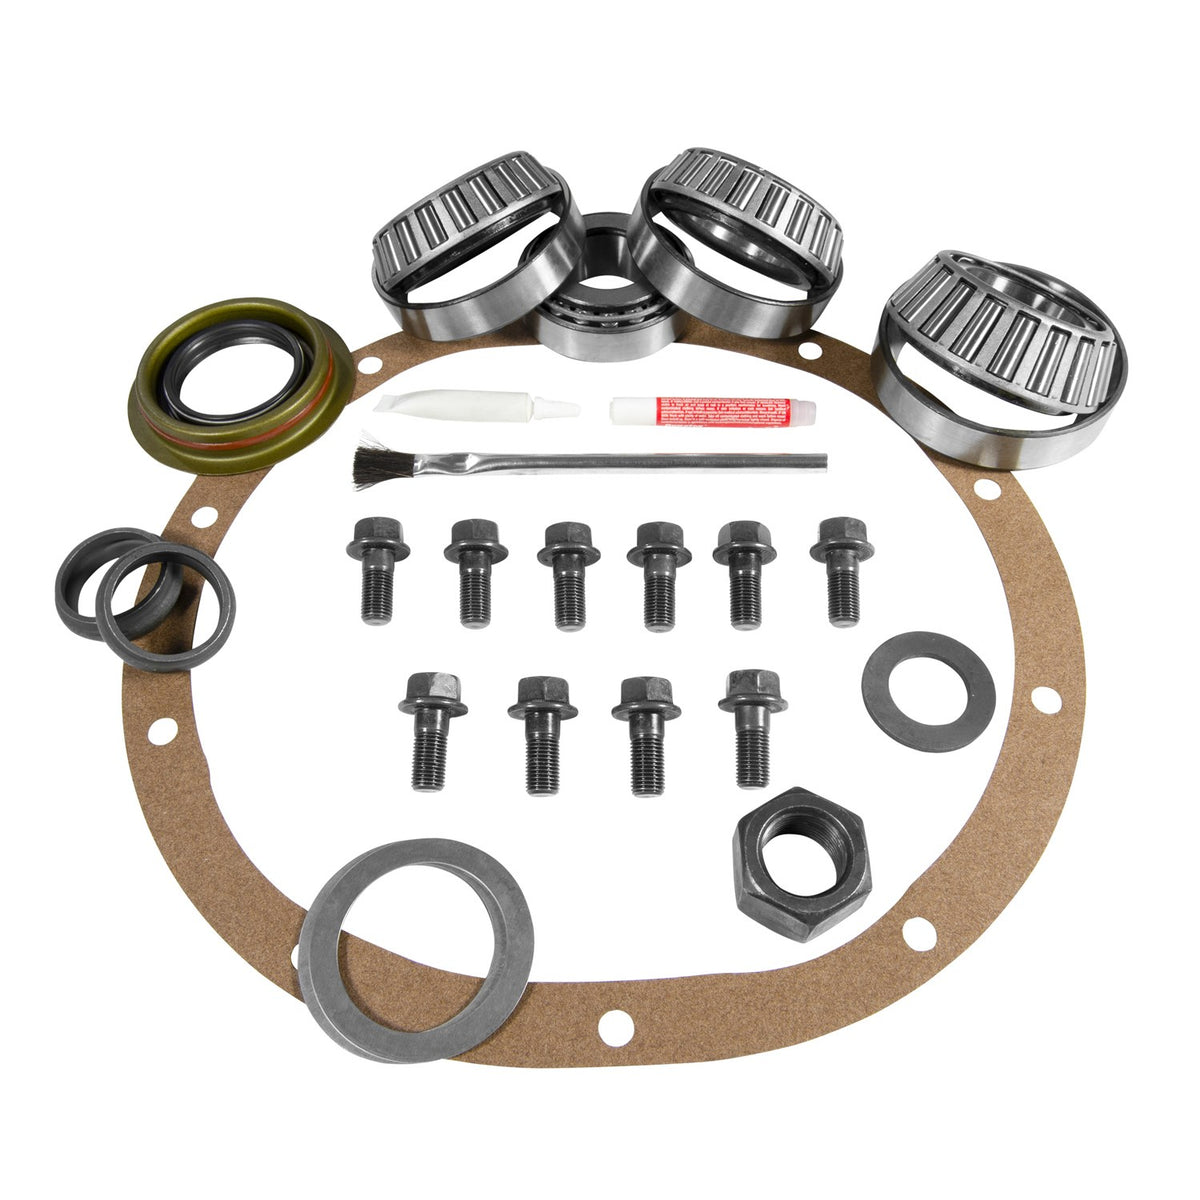 Eaton Ford 9in 2.895 CB Master Installation Kit